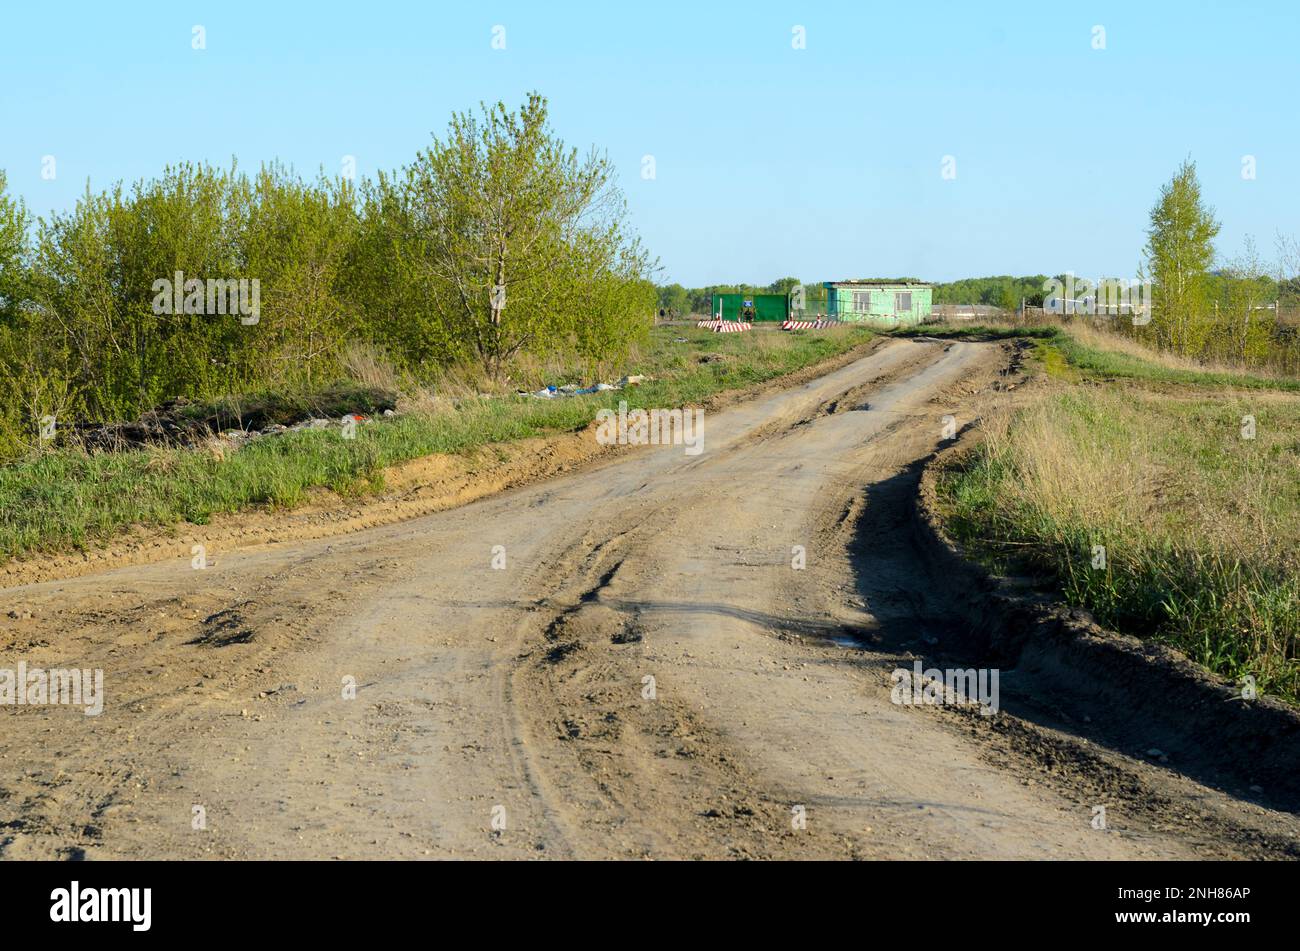 Dirt road with garbage in the grass to a small military building control checkpoint near the fence and the field with the forest in the summer. Stock Photo